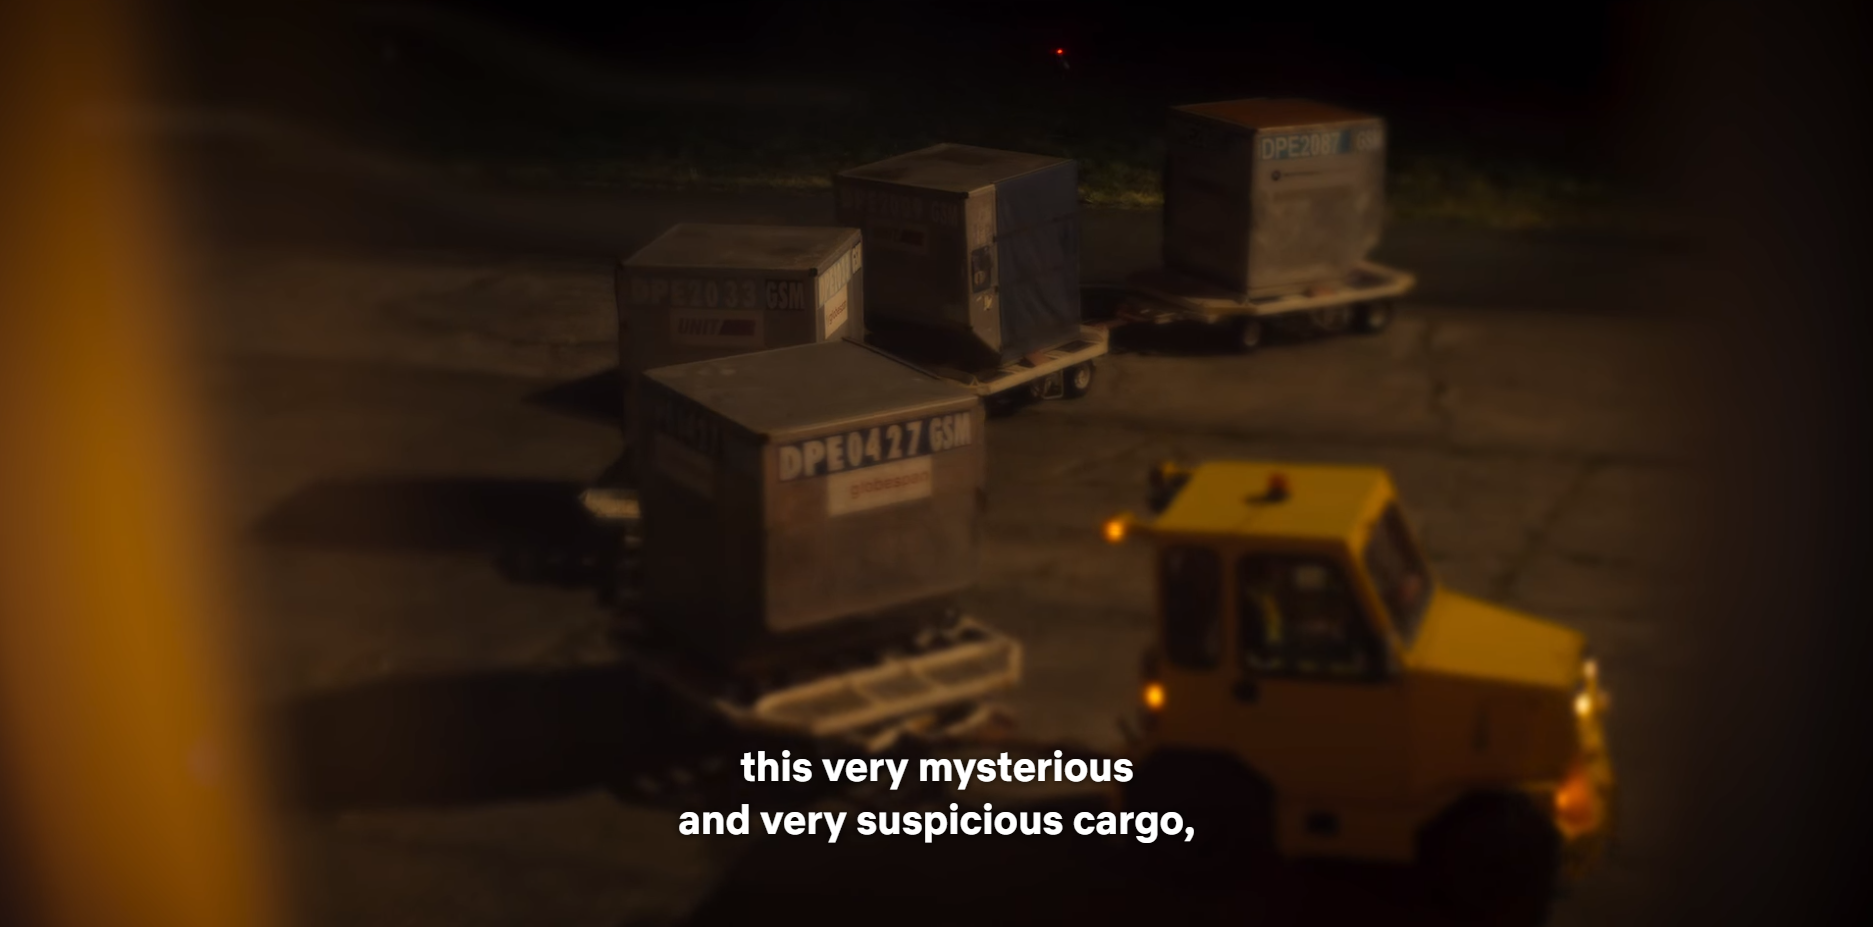 MH370 review - cargo